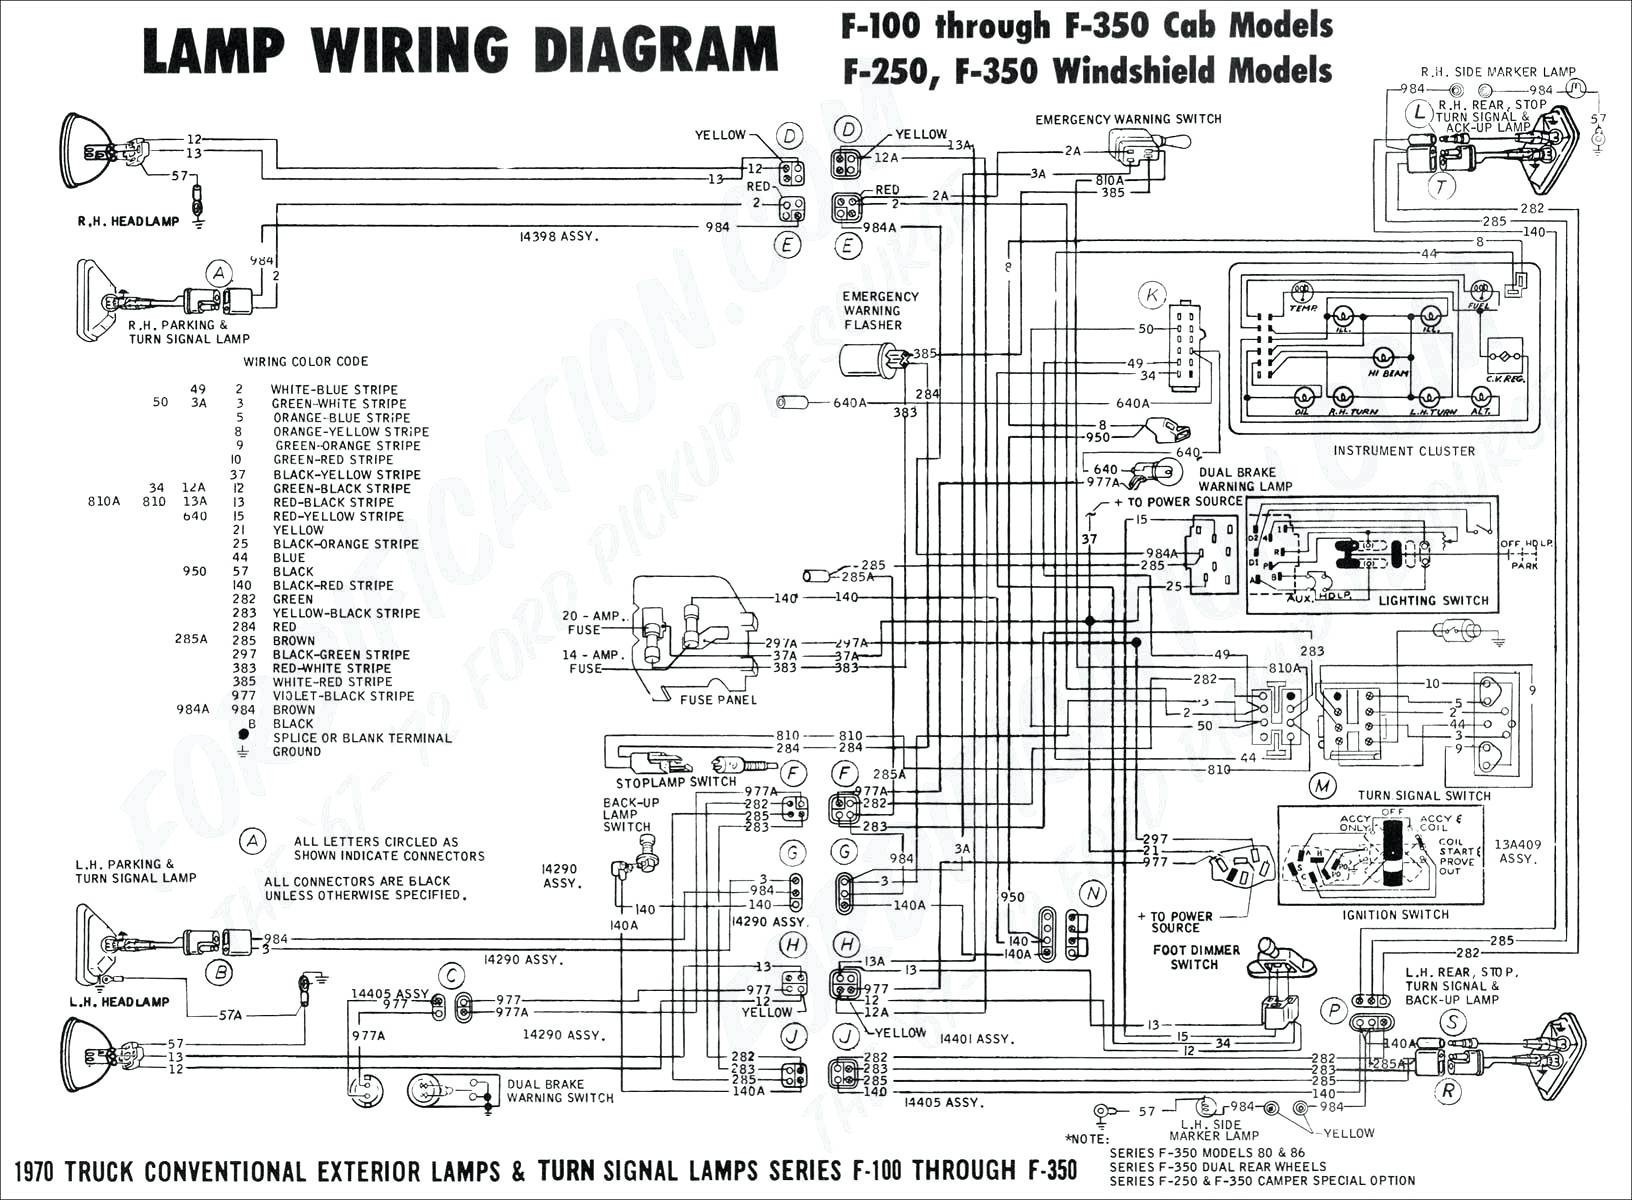 Ford Truck Trailer Wiring Diagram 97 ford Truck Trailer Wiring Wiring Diagram toolbox Of Ford Truck Trailer Wiring Diagram